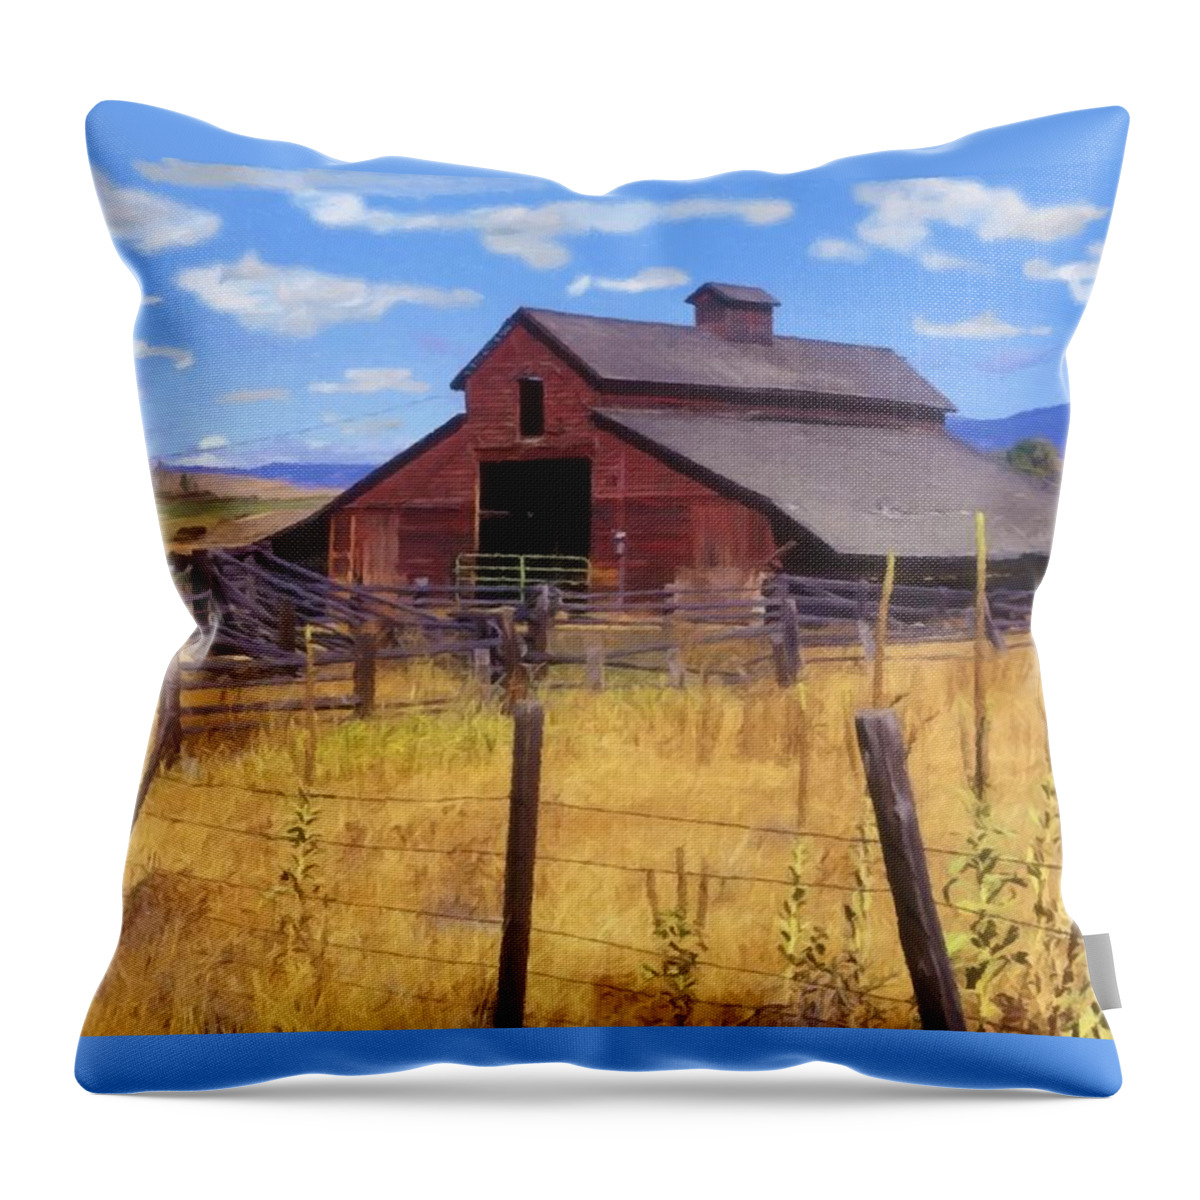 Barn In The Mountains Throw Pillow featuring the photograph Barn In the Mountains by Sandi OReilly